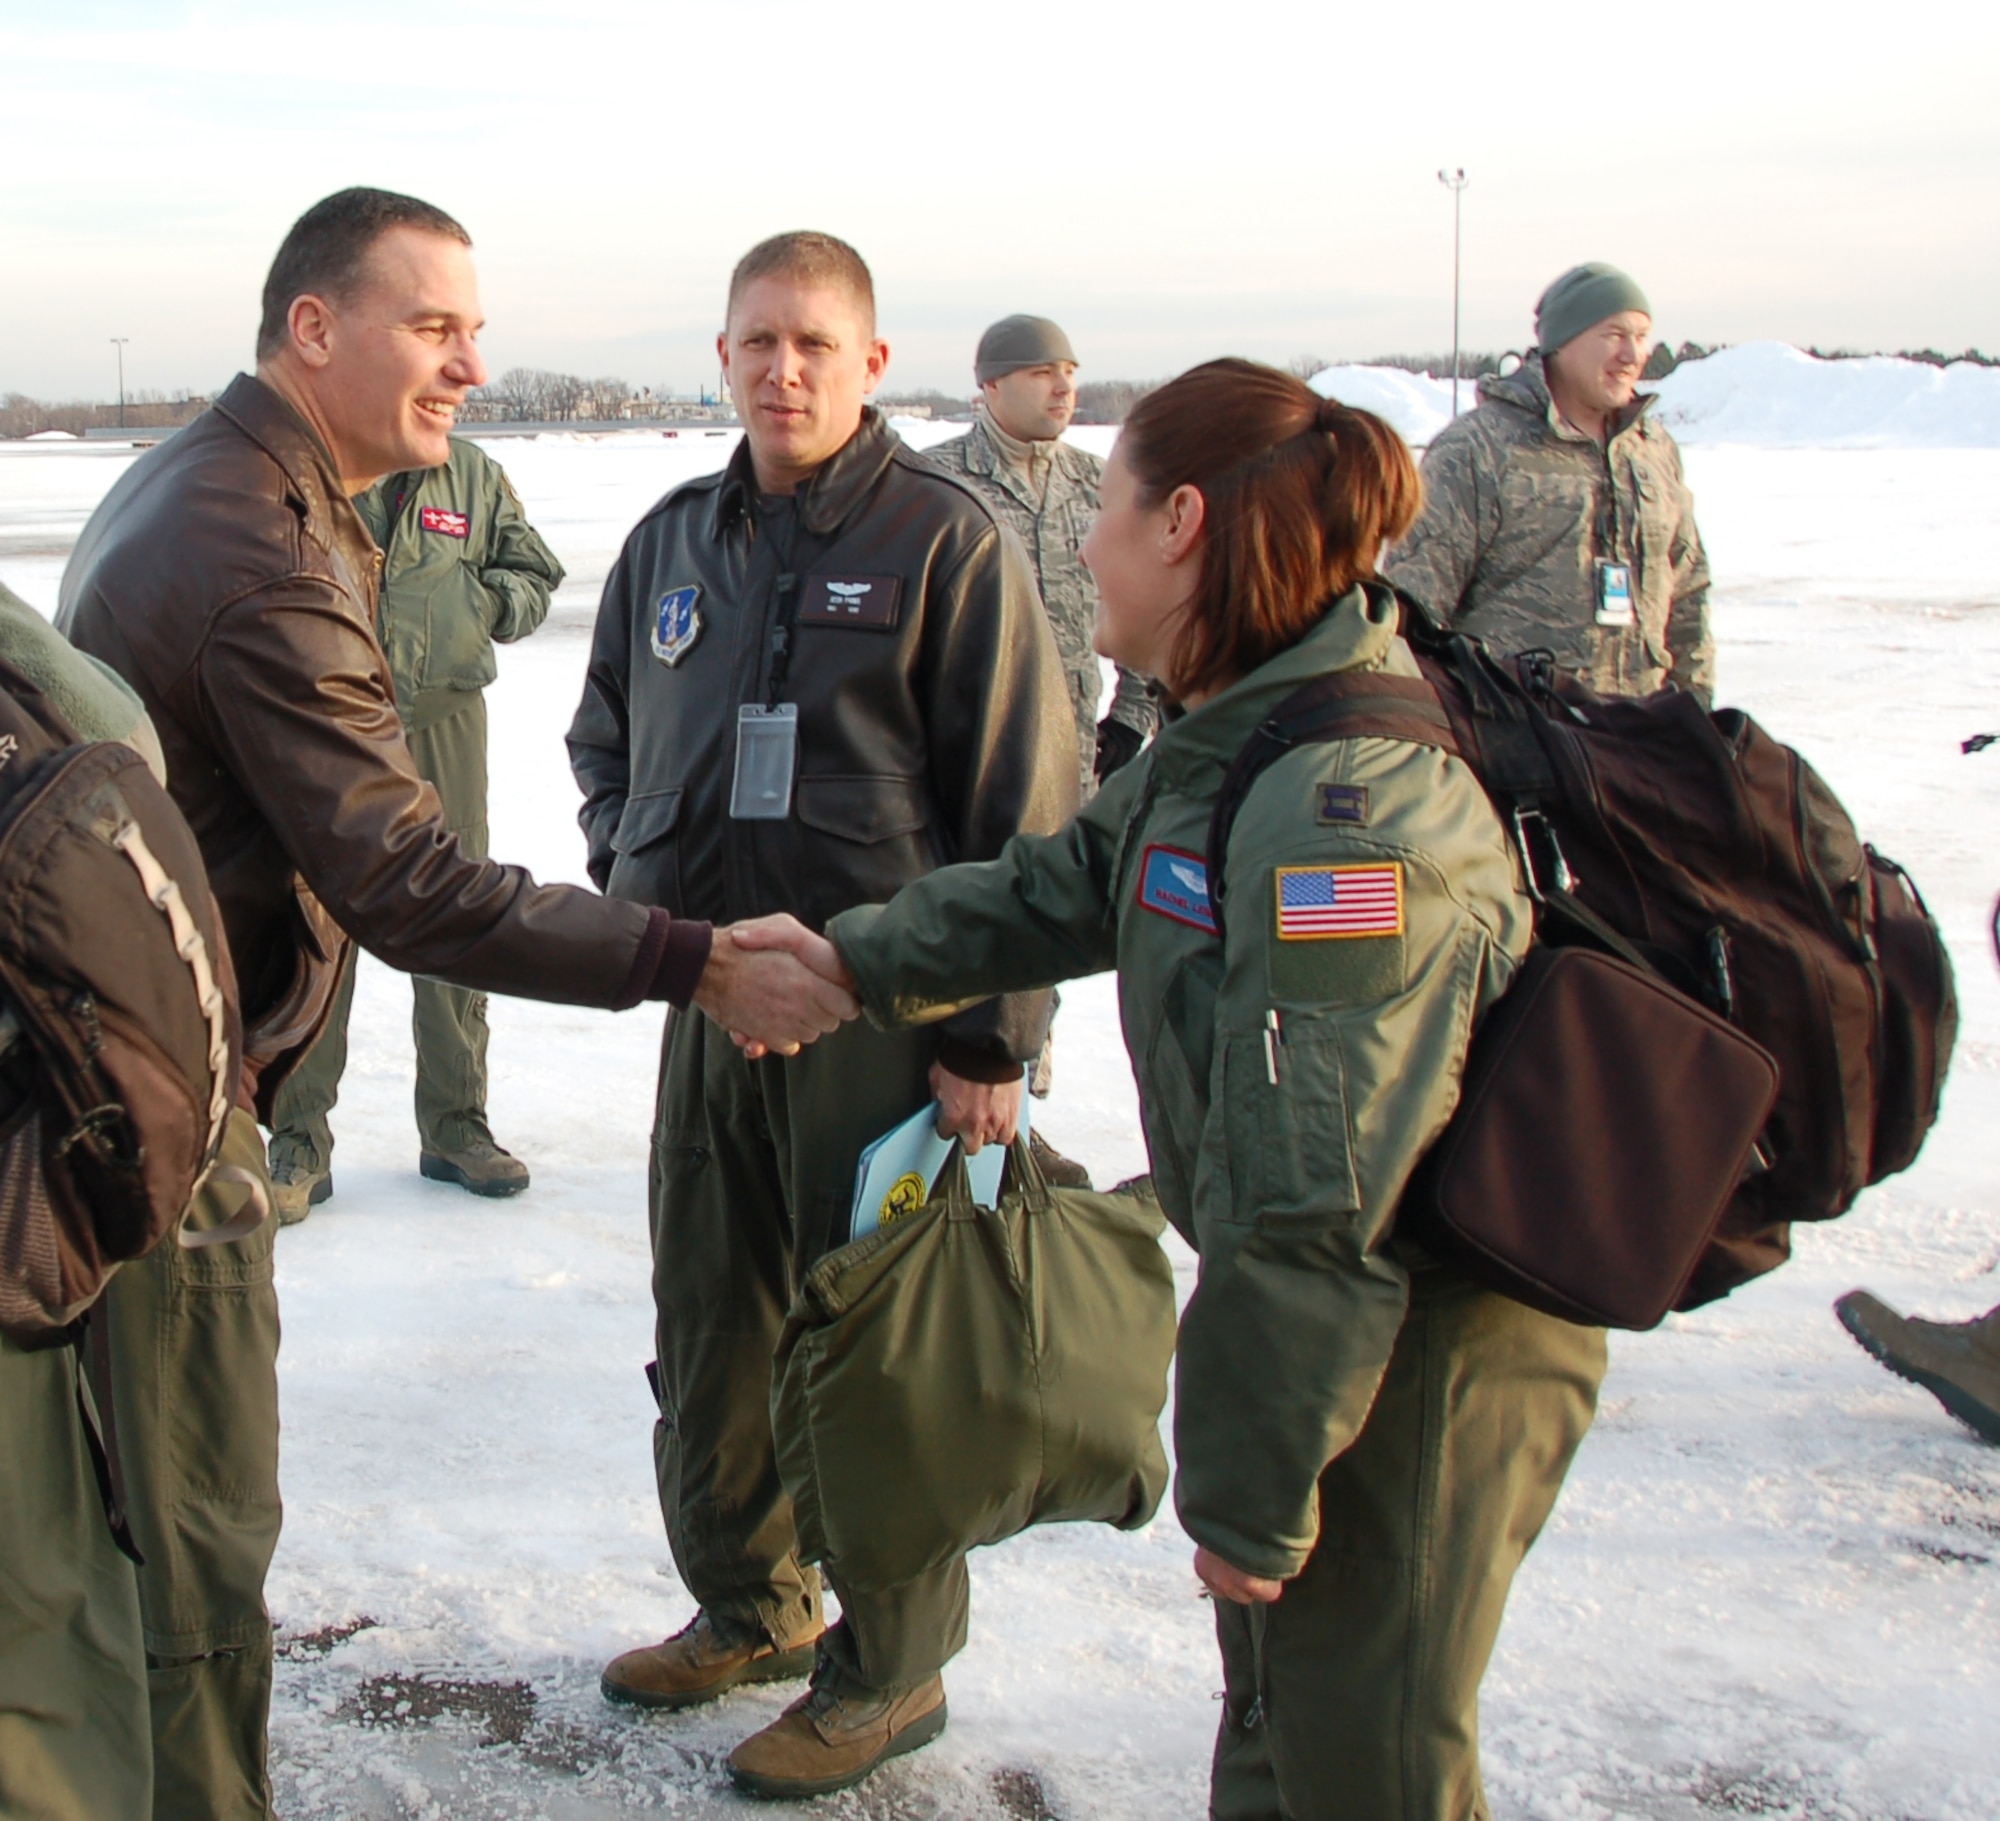 Col. Frank Detorie, commander of the 103rd Airlift Wing, greets Capt. Rachel Leimbach, a navigator assigned to the 139th Airlift Squadron, moments before the launch of the first locally-generated sortie aboard a C-130H Hercules aircraft Dec. 19, 2013, at Bradley Air National Guard Base, East Granby, Conn. The aircrew was comprised of Airmen from the Connecticut Air National Guard, the New York Air National Guard and the U.S.A.F.    (U.S. Air National Guard photo by Maj. Bryon Turner)